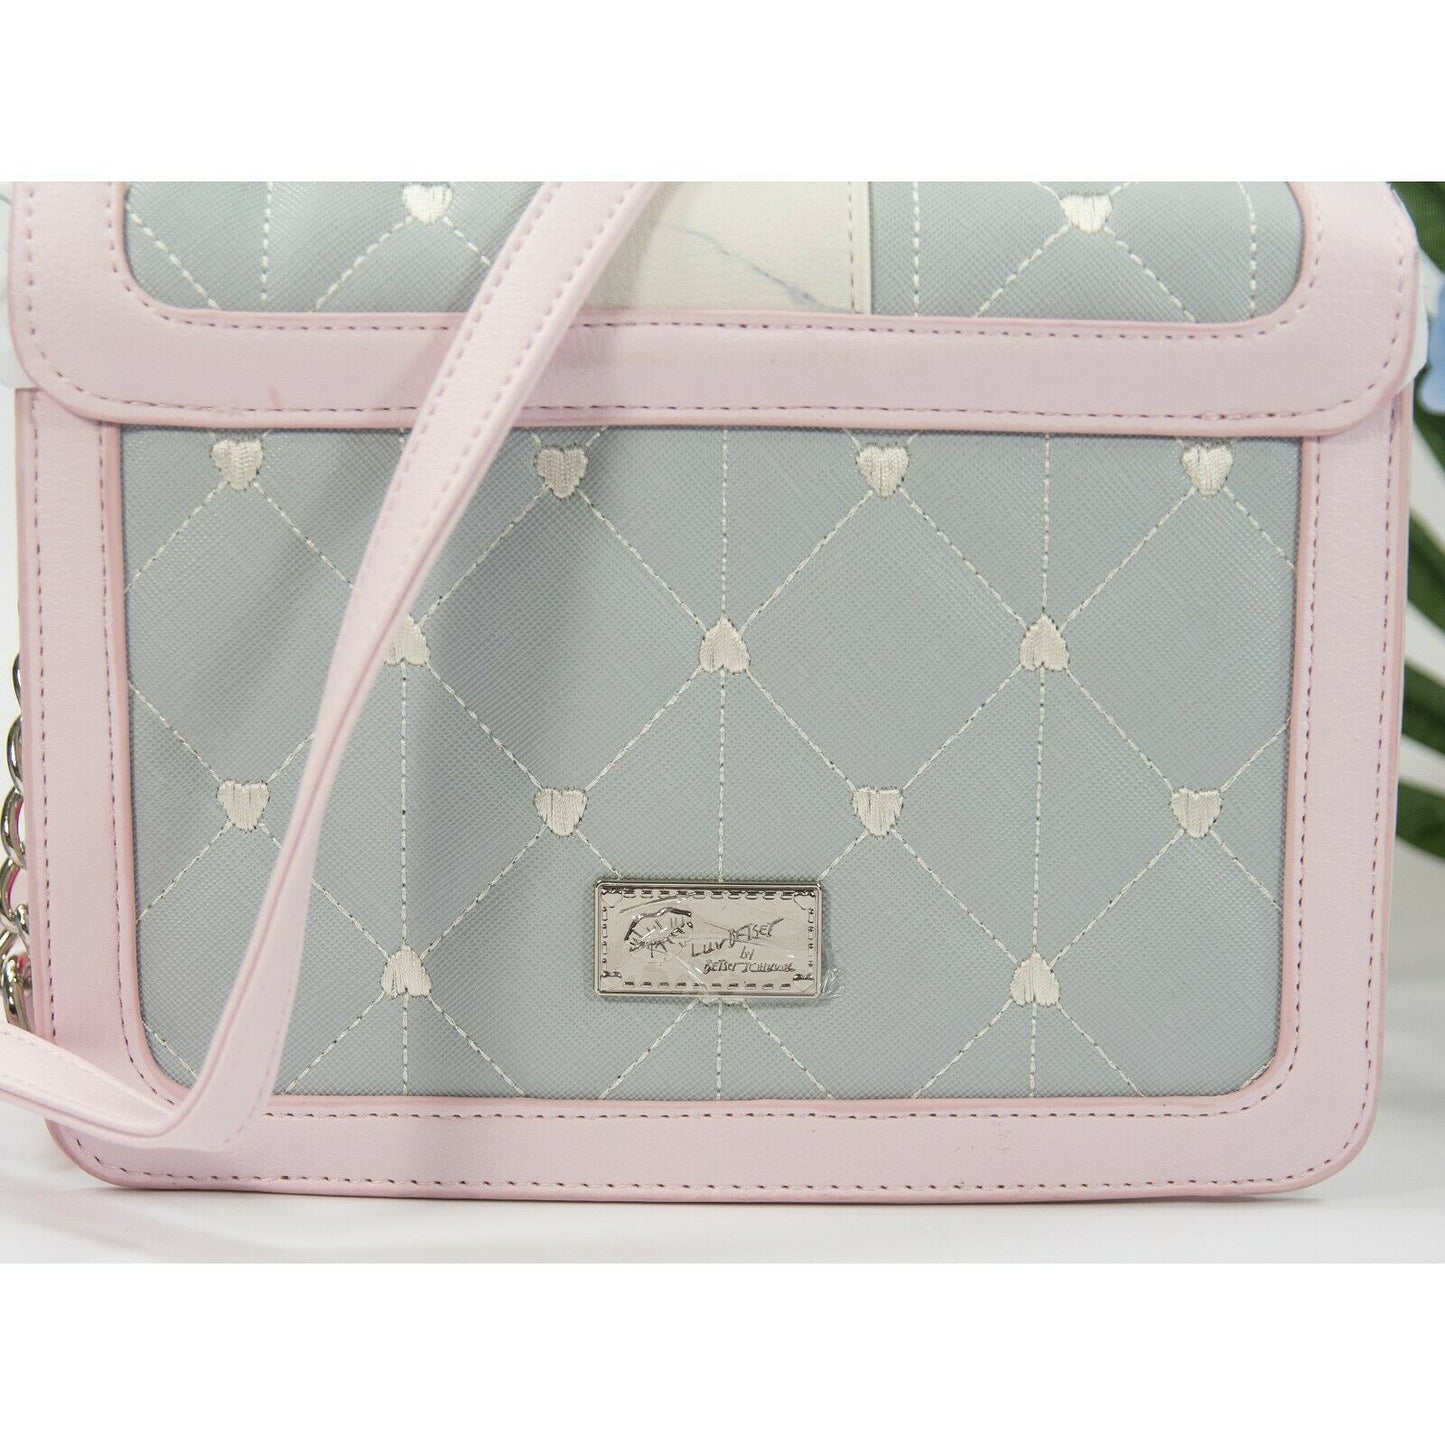 Betsey Johnson Vivian Pale Blue Heart Embroidered Marble Cat Crossbody NWT